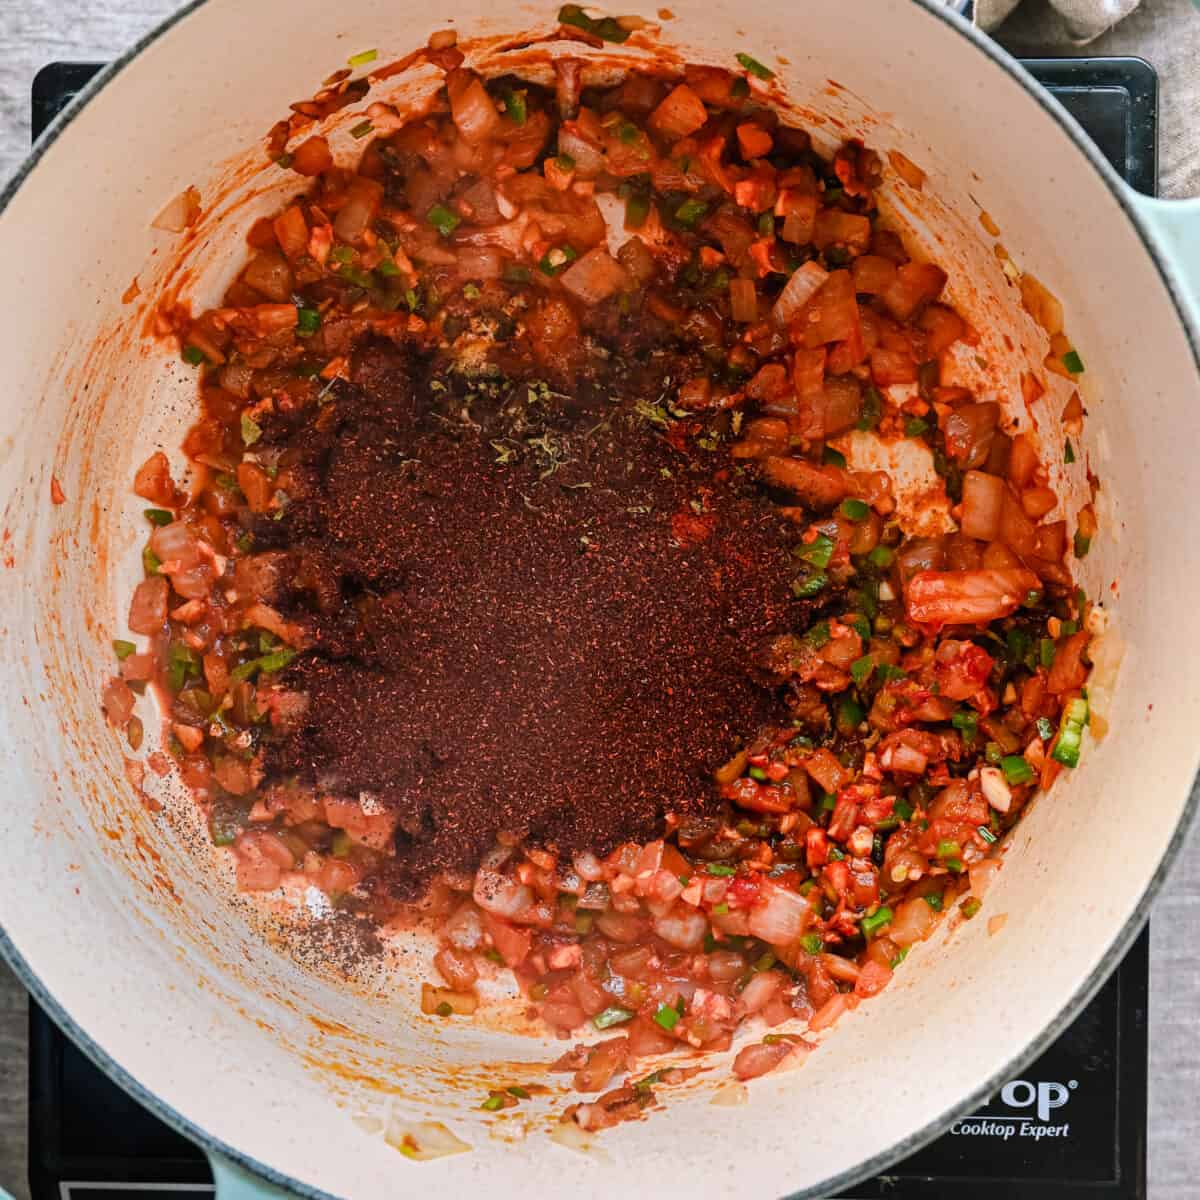 chili powder and spices added to aromatics